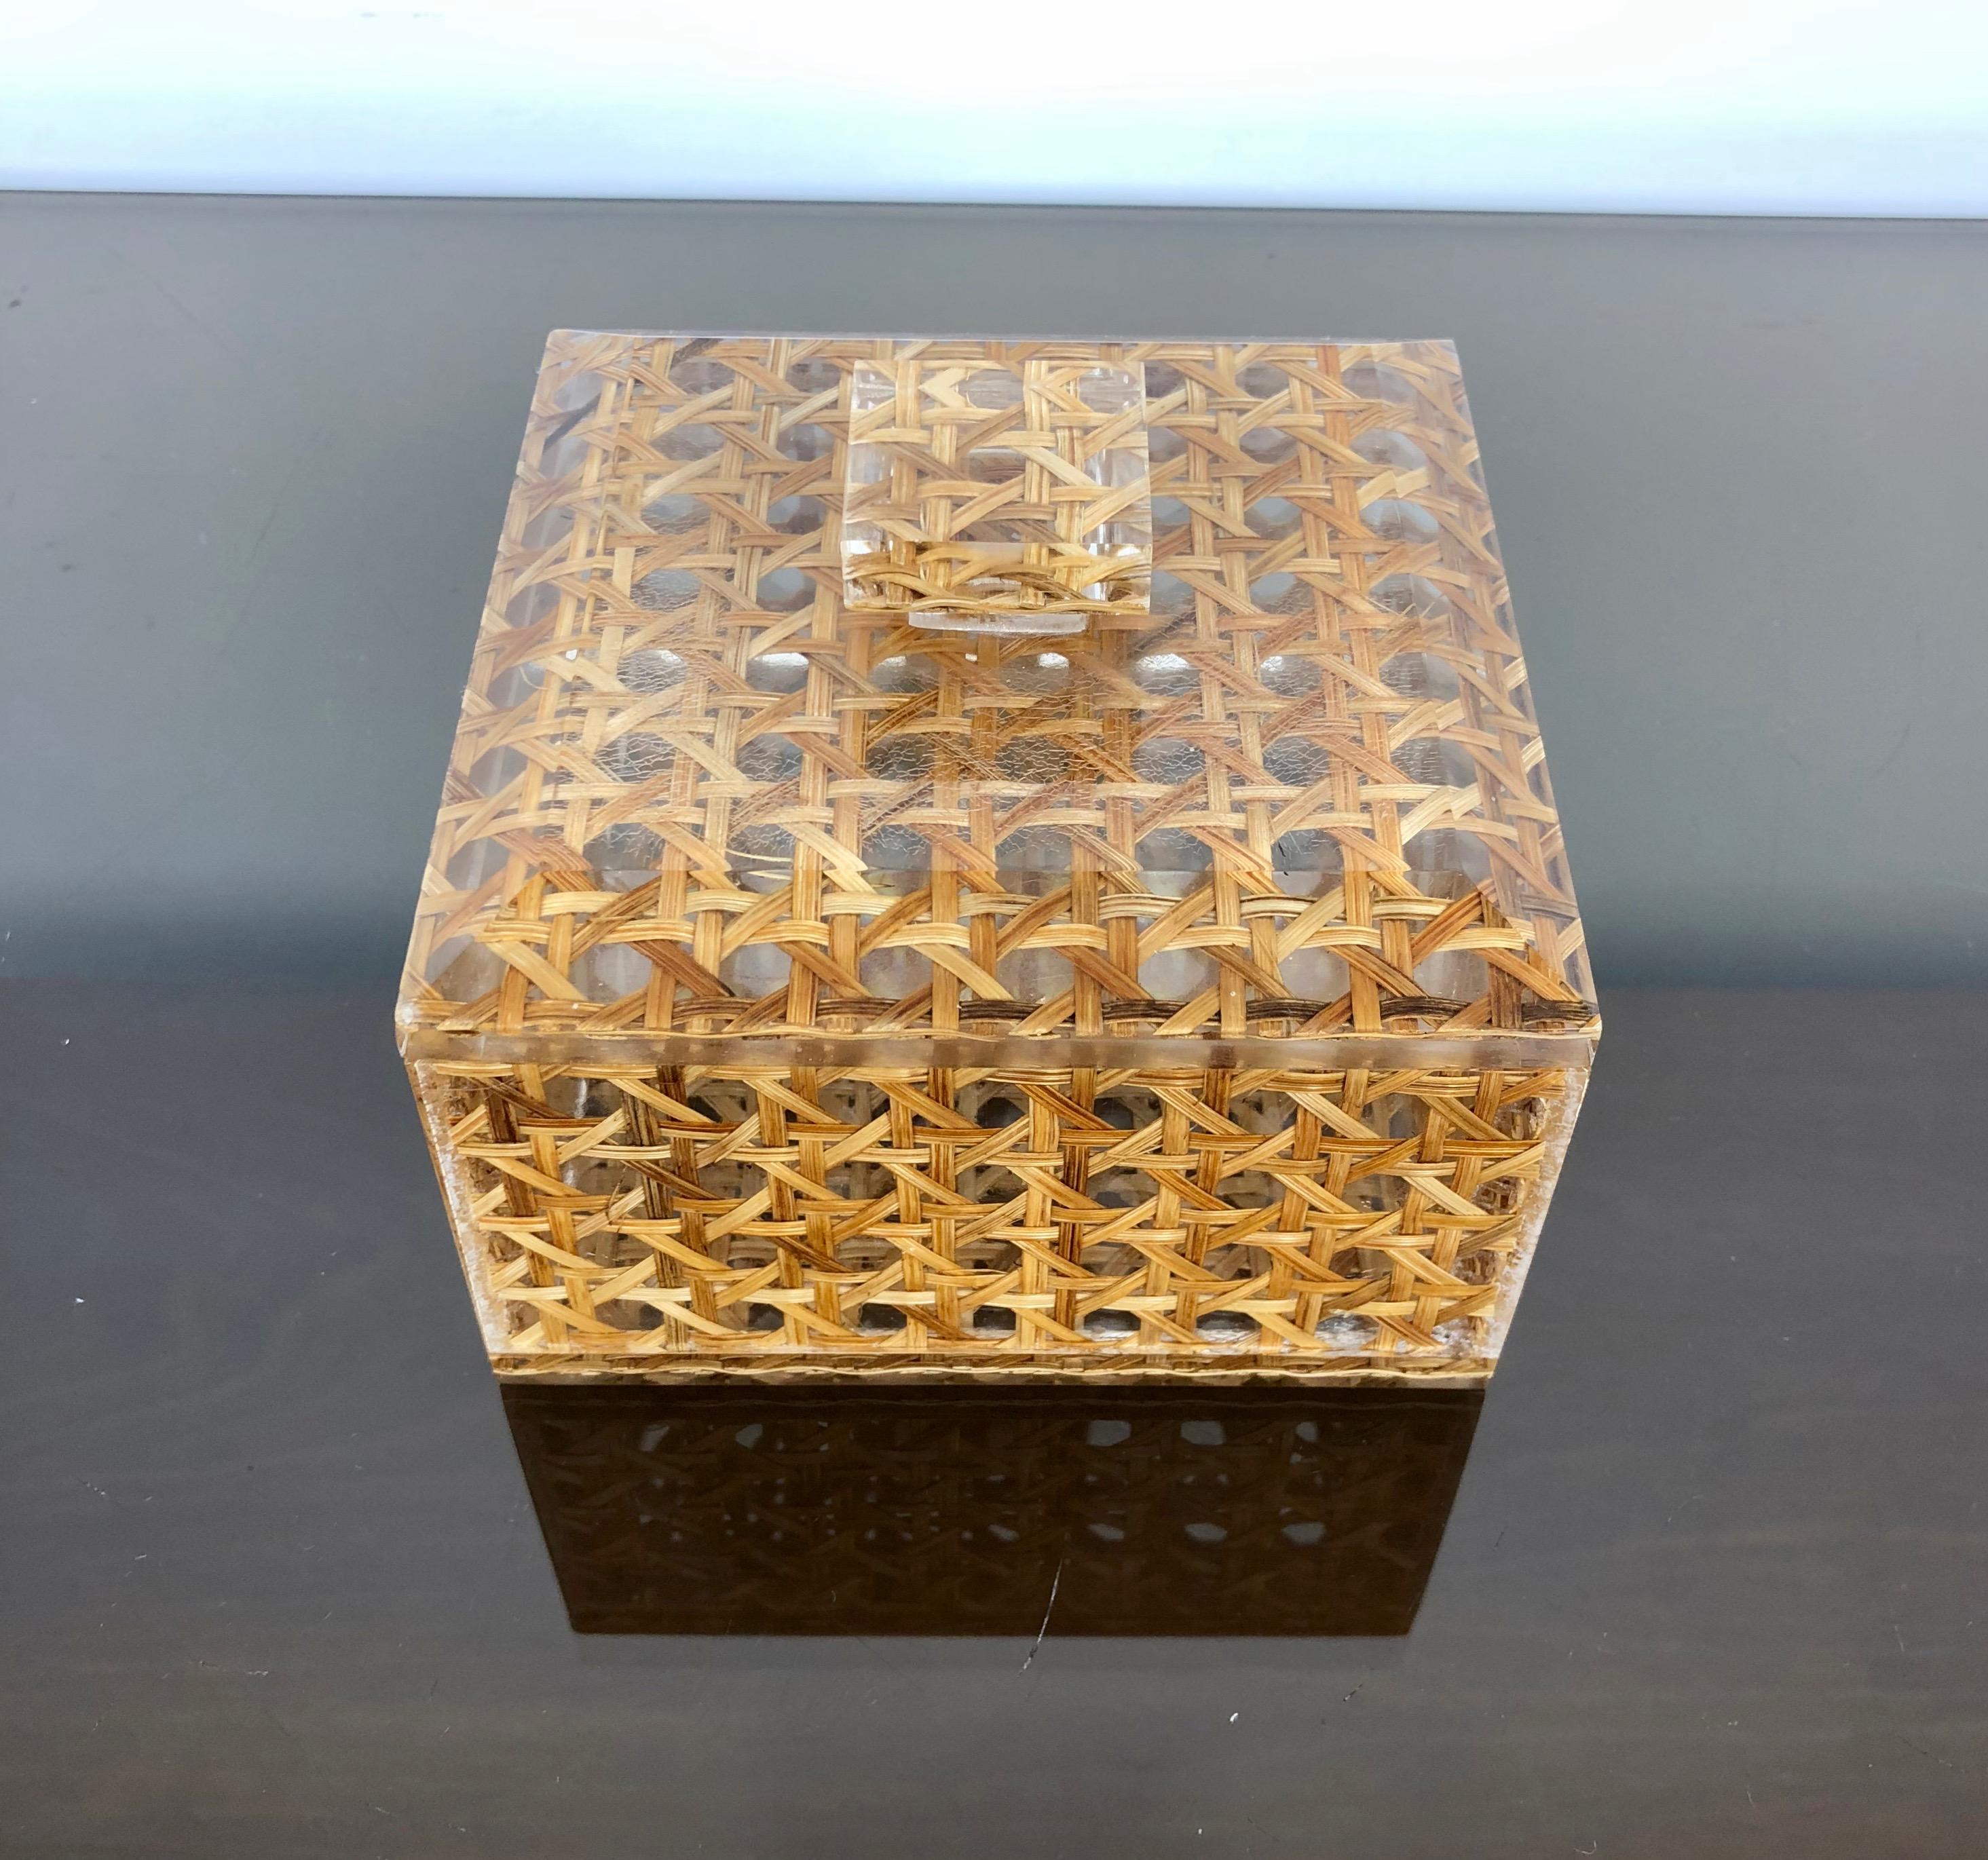 Squared box in Lucite and rattan, Christian Dior style, 1970s, France.